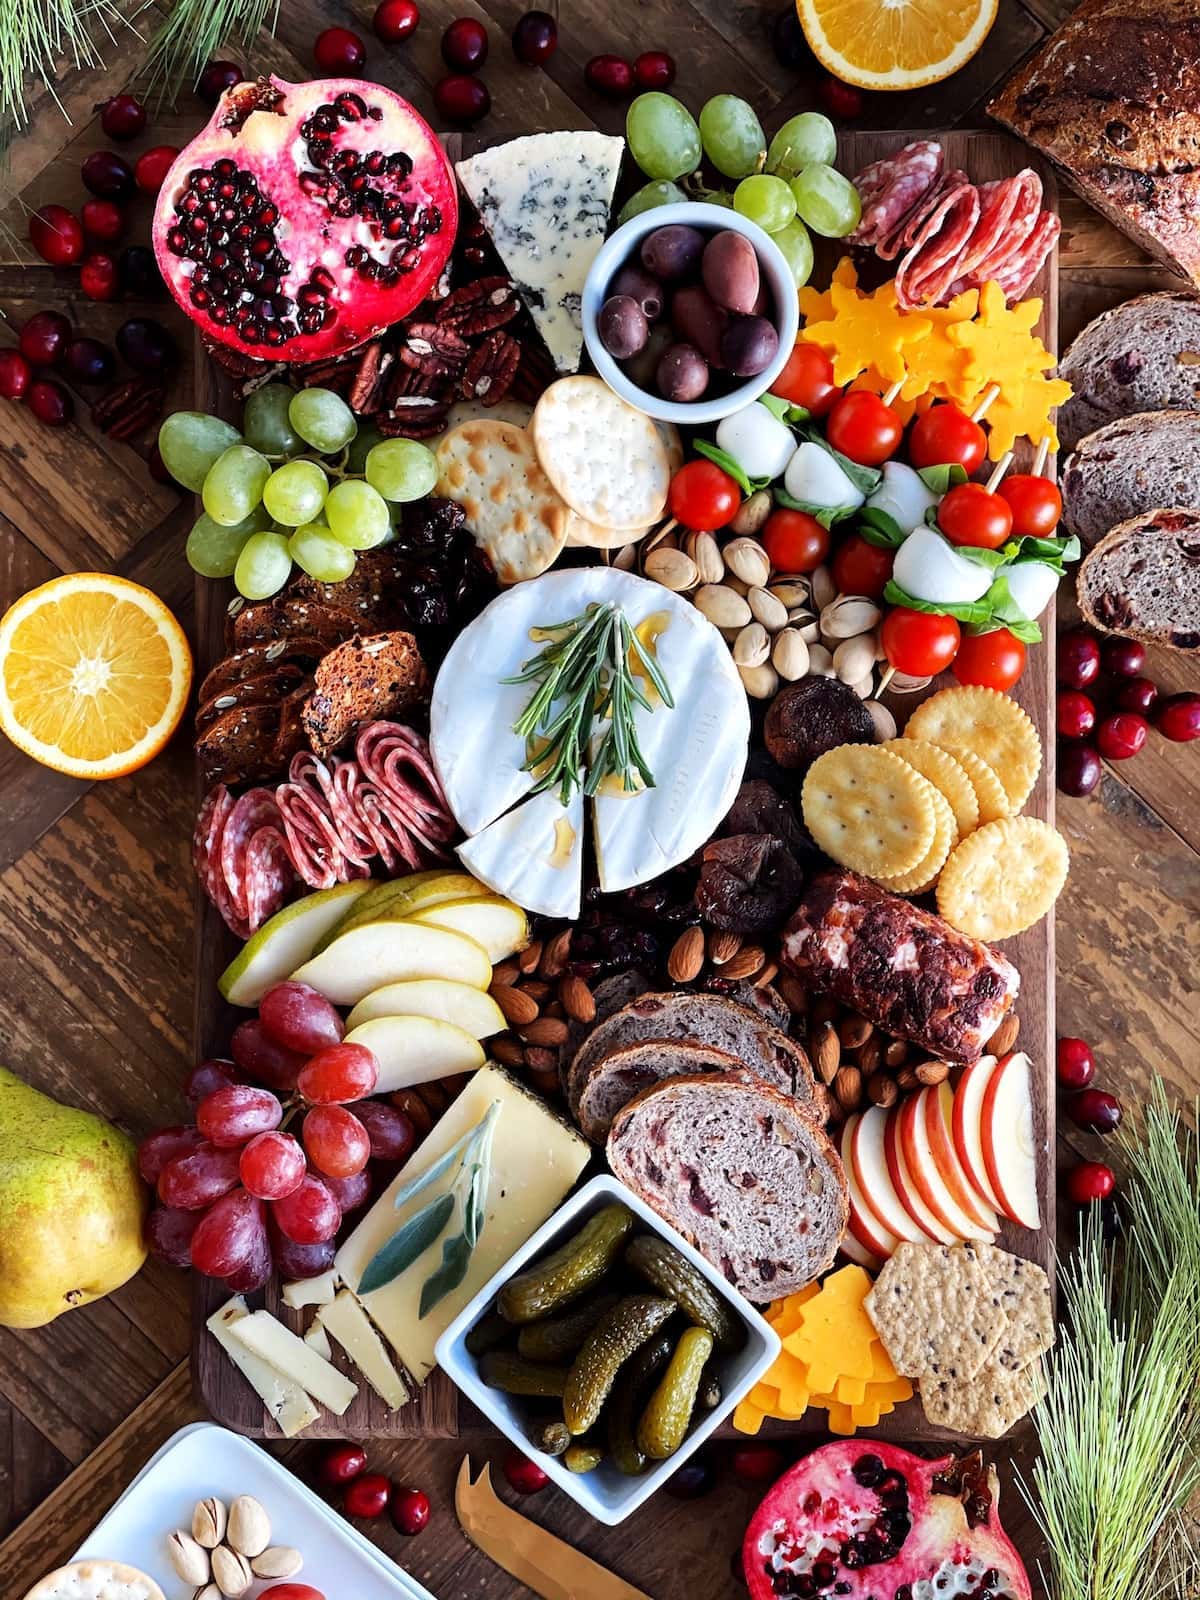 How to Make an EPIC Holiday Cheese Board in 10 Minutes!